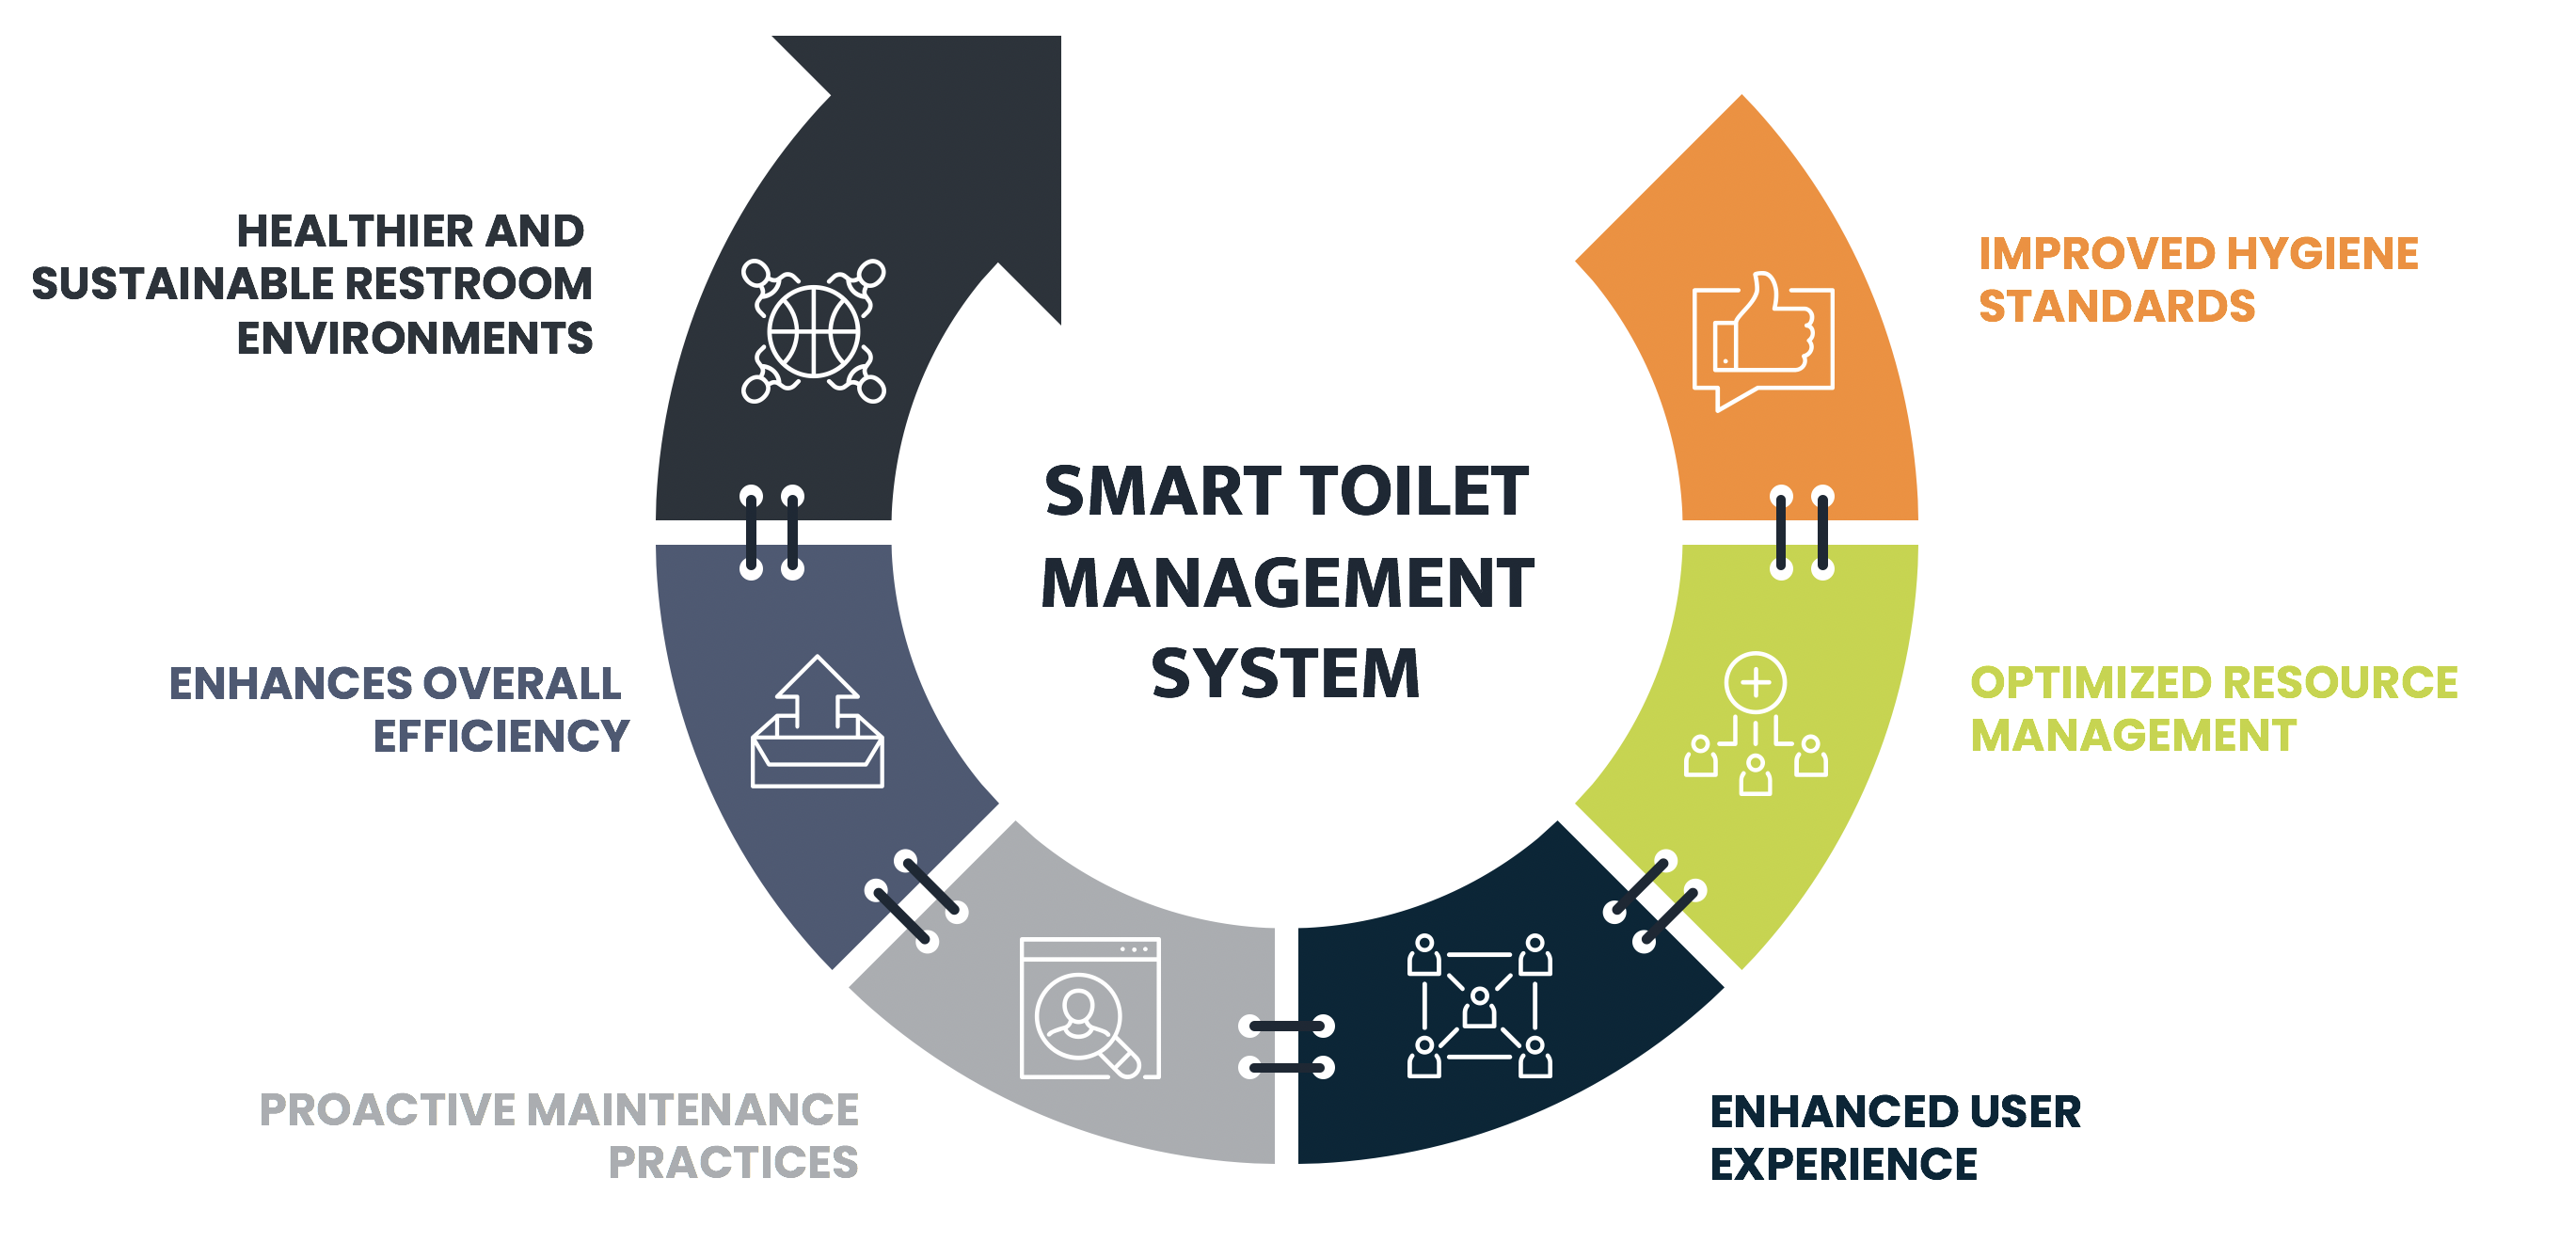 The implementation of a Smart Toilet Management System brings numerous benefits to both individuals and organizations. By leveraging advanced technology and data analytics, this system revolutionizes the way toilets are managed and maintained.